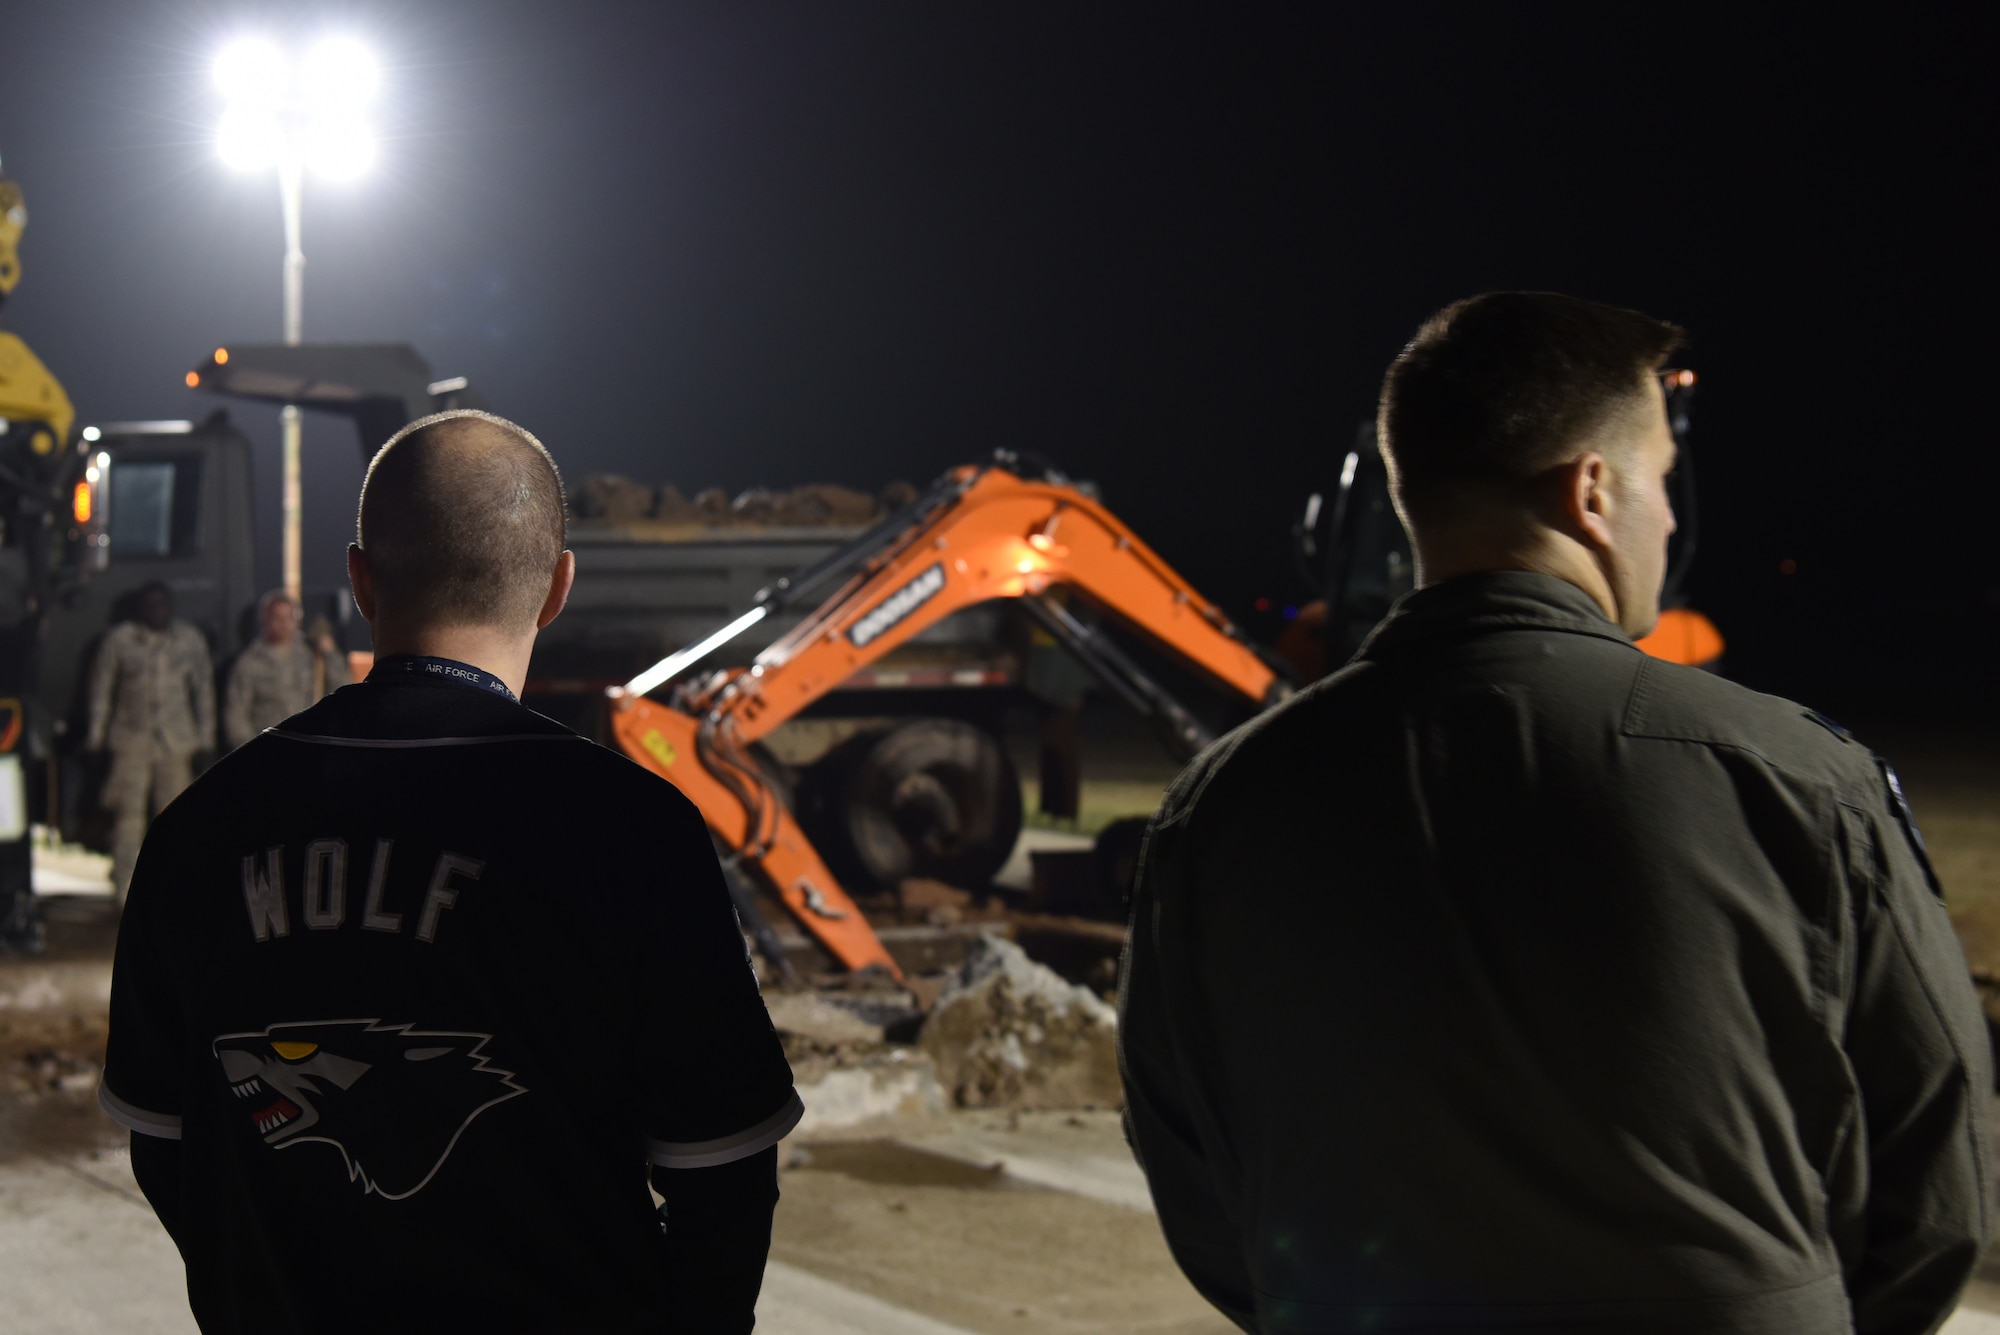 (Left) U.S. Air Force Col. John Bosone, 8th Fighter Wing commander, and Lt. Col. Oliver Lause, 35th Fighter Squadron commander, check the progress on rupture damage repairs at Kunsan Air Base, Republic of Korea, May 1, 2019. The 8th CES provided emergency repairs to the flight line to make it operational within 24 hours after it was closed unexpectedly due to a sinkhole. (U.S. Air Force photo by Staff Sgt. Joshua Edwards)